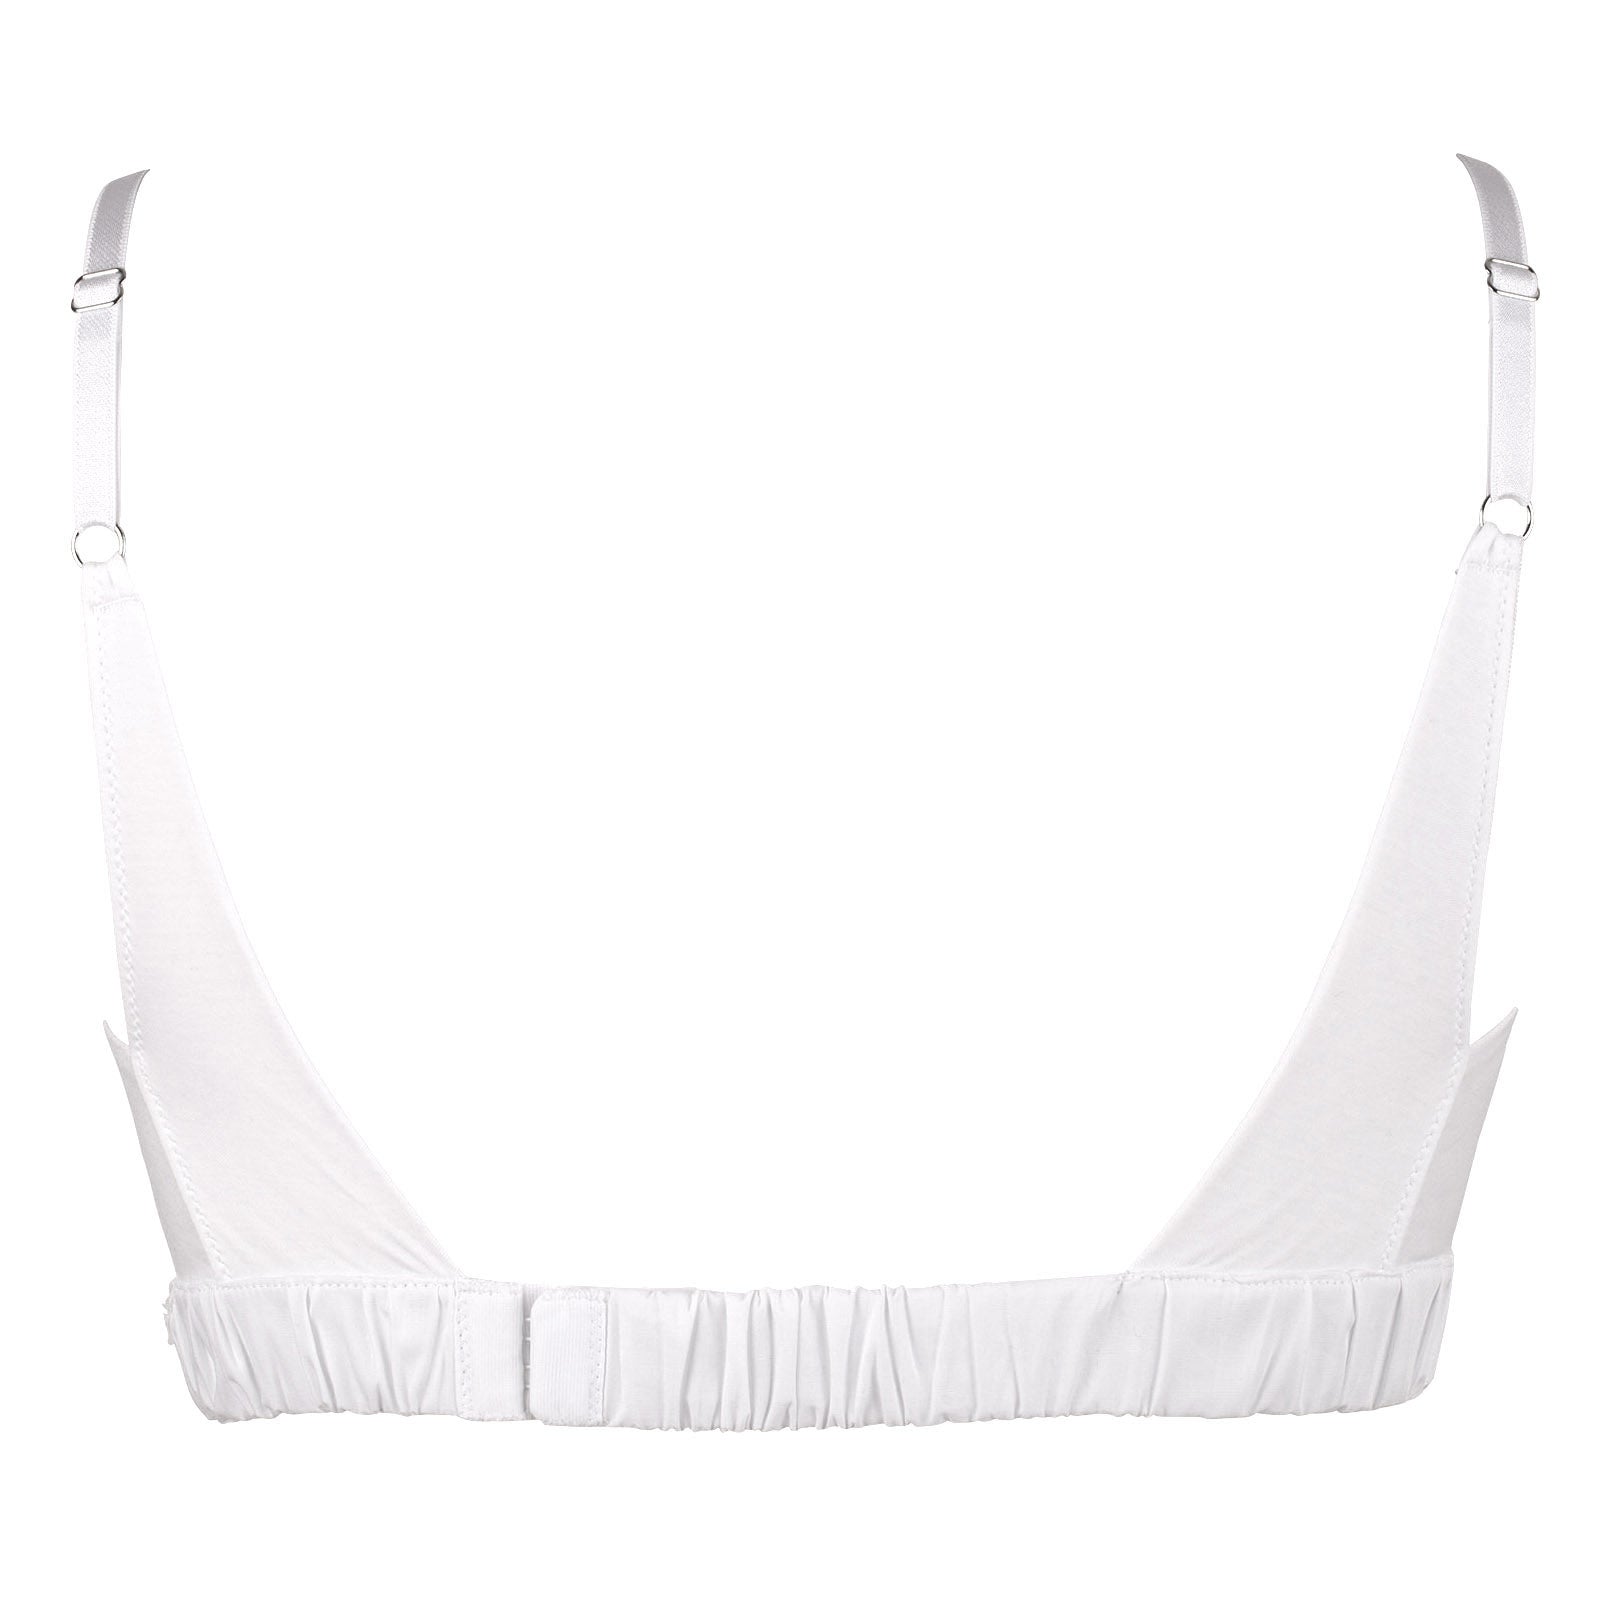 Rossell England - Our most popular bra, Cosa, featured here in white,  pointelle stitch cotton jersey. Non-wired and very supportive, now offered  in sizing up to an E-cup. Link in bio to